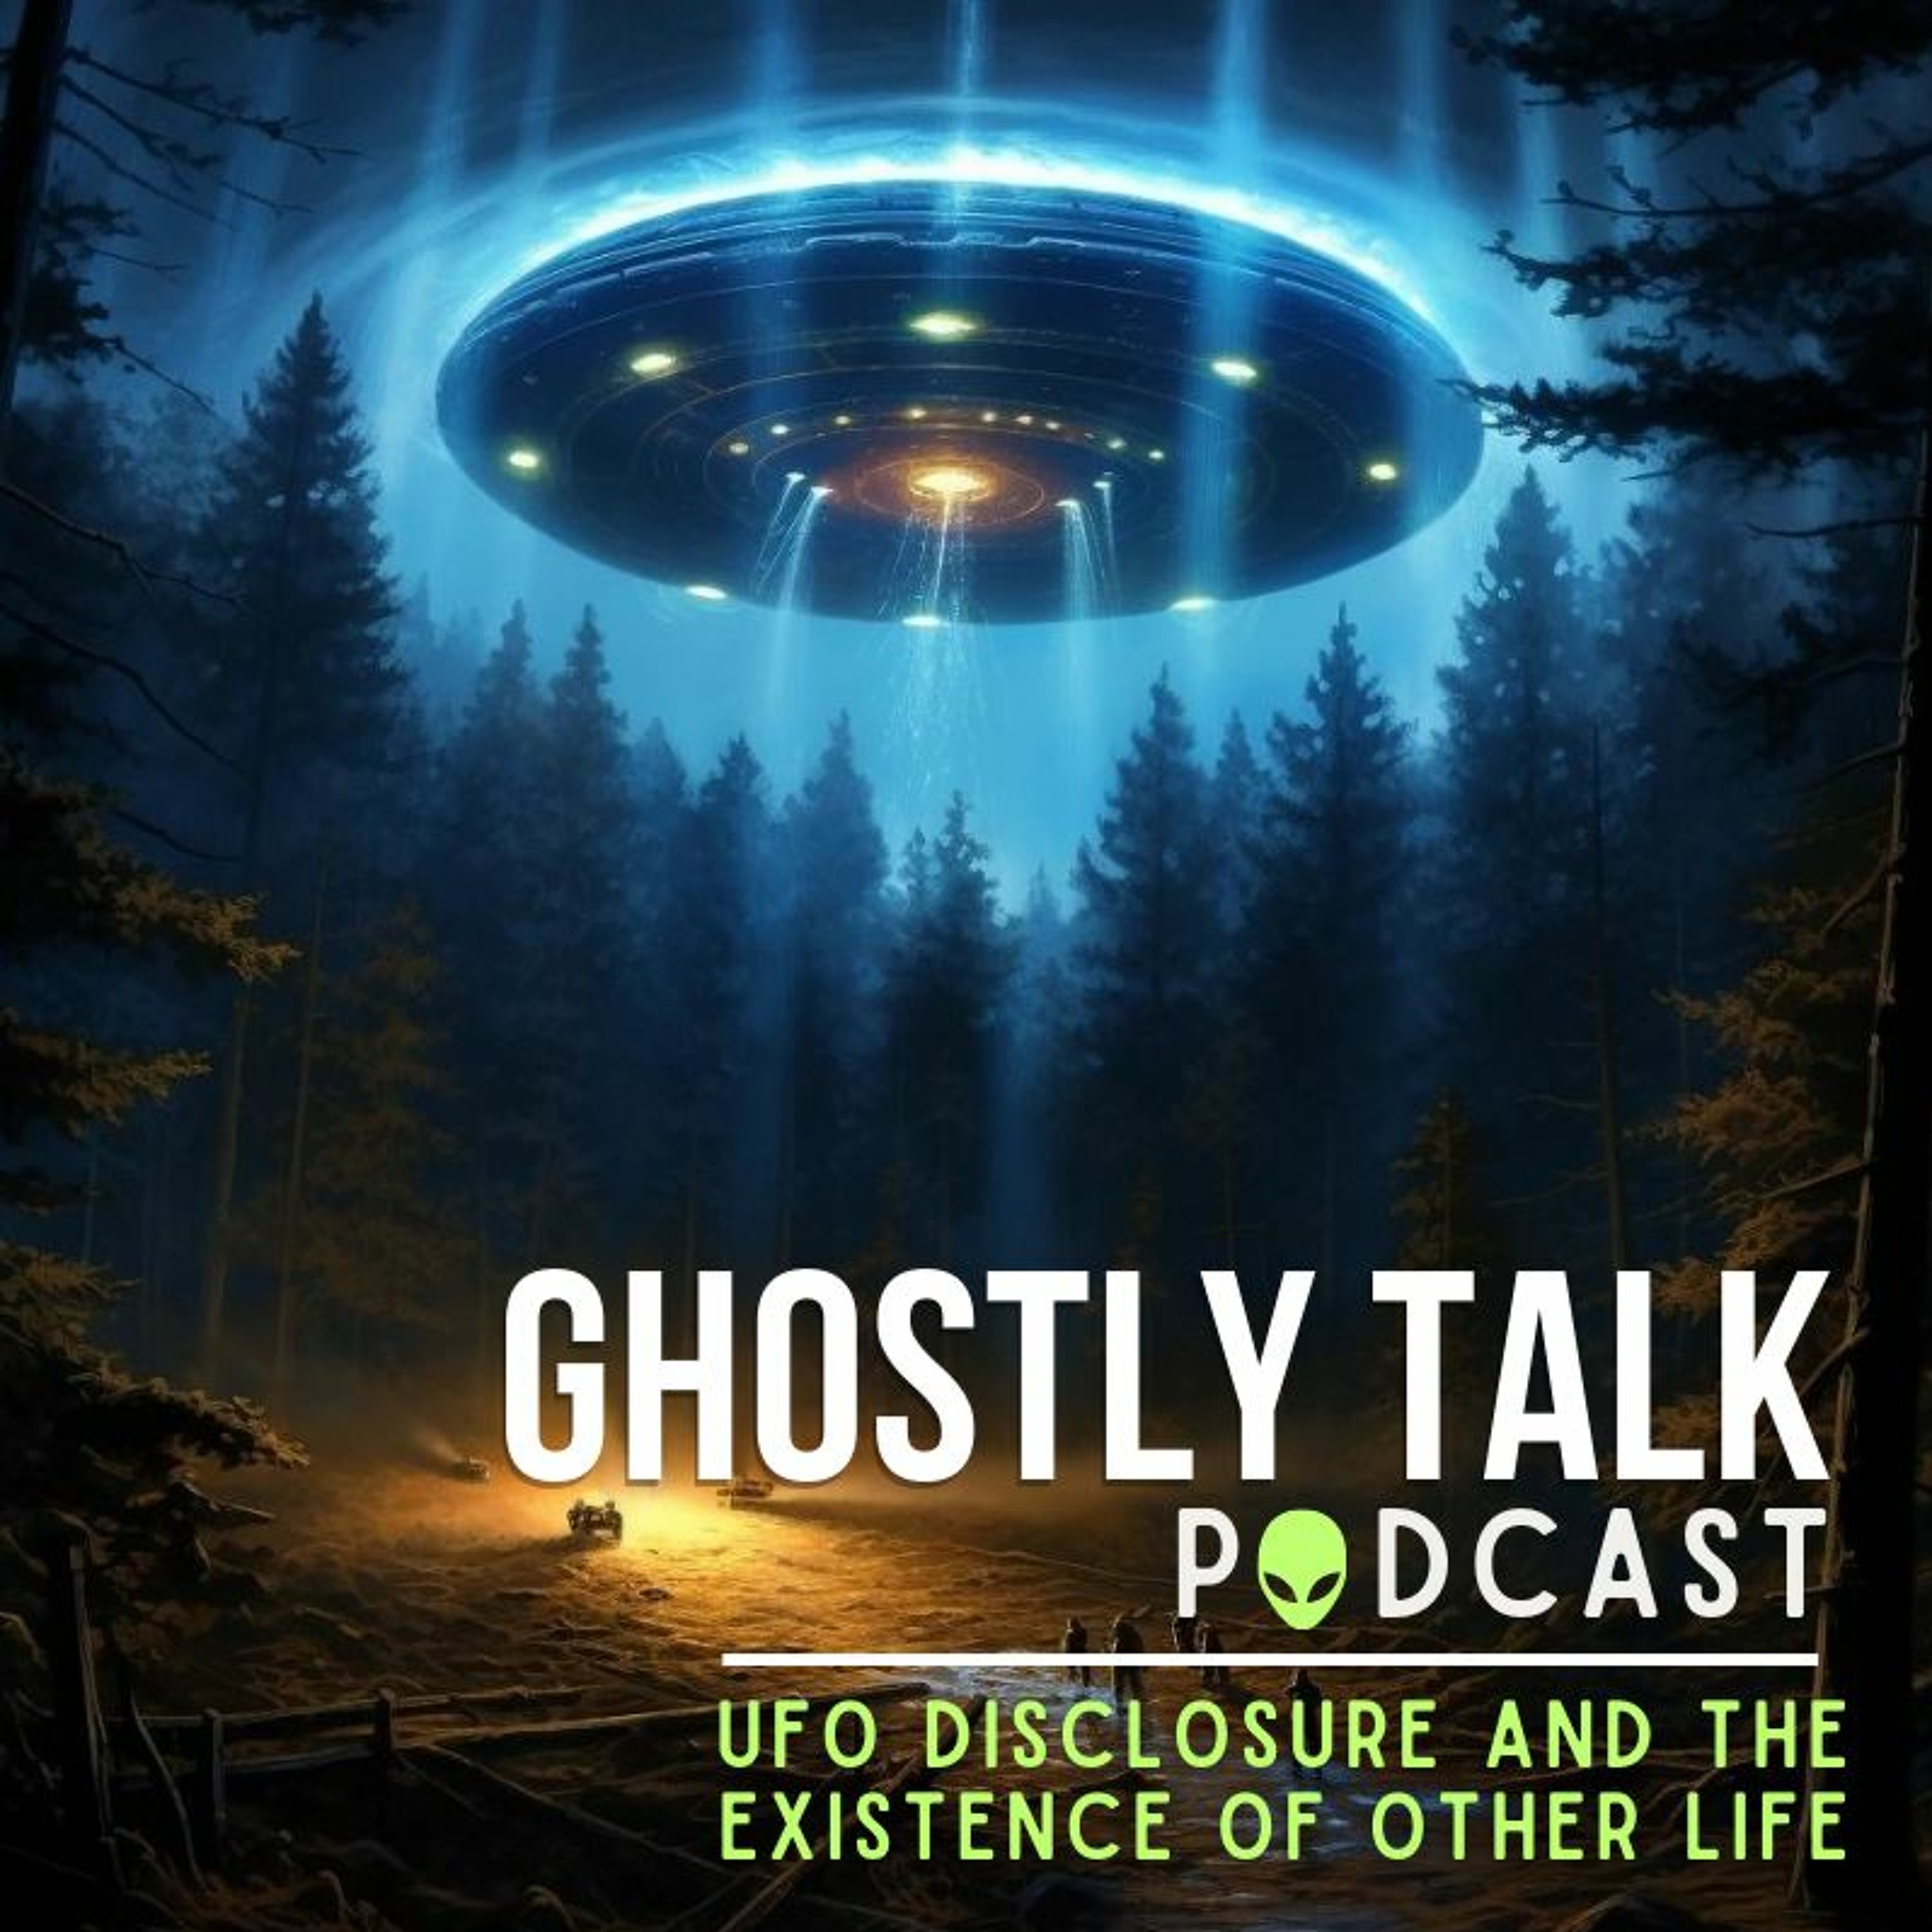 Ep 196 - UFO Disclosure and the Existence of Other Life